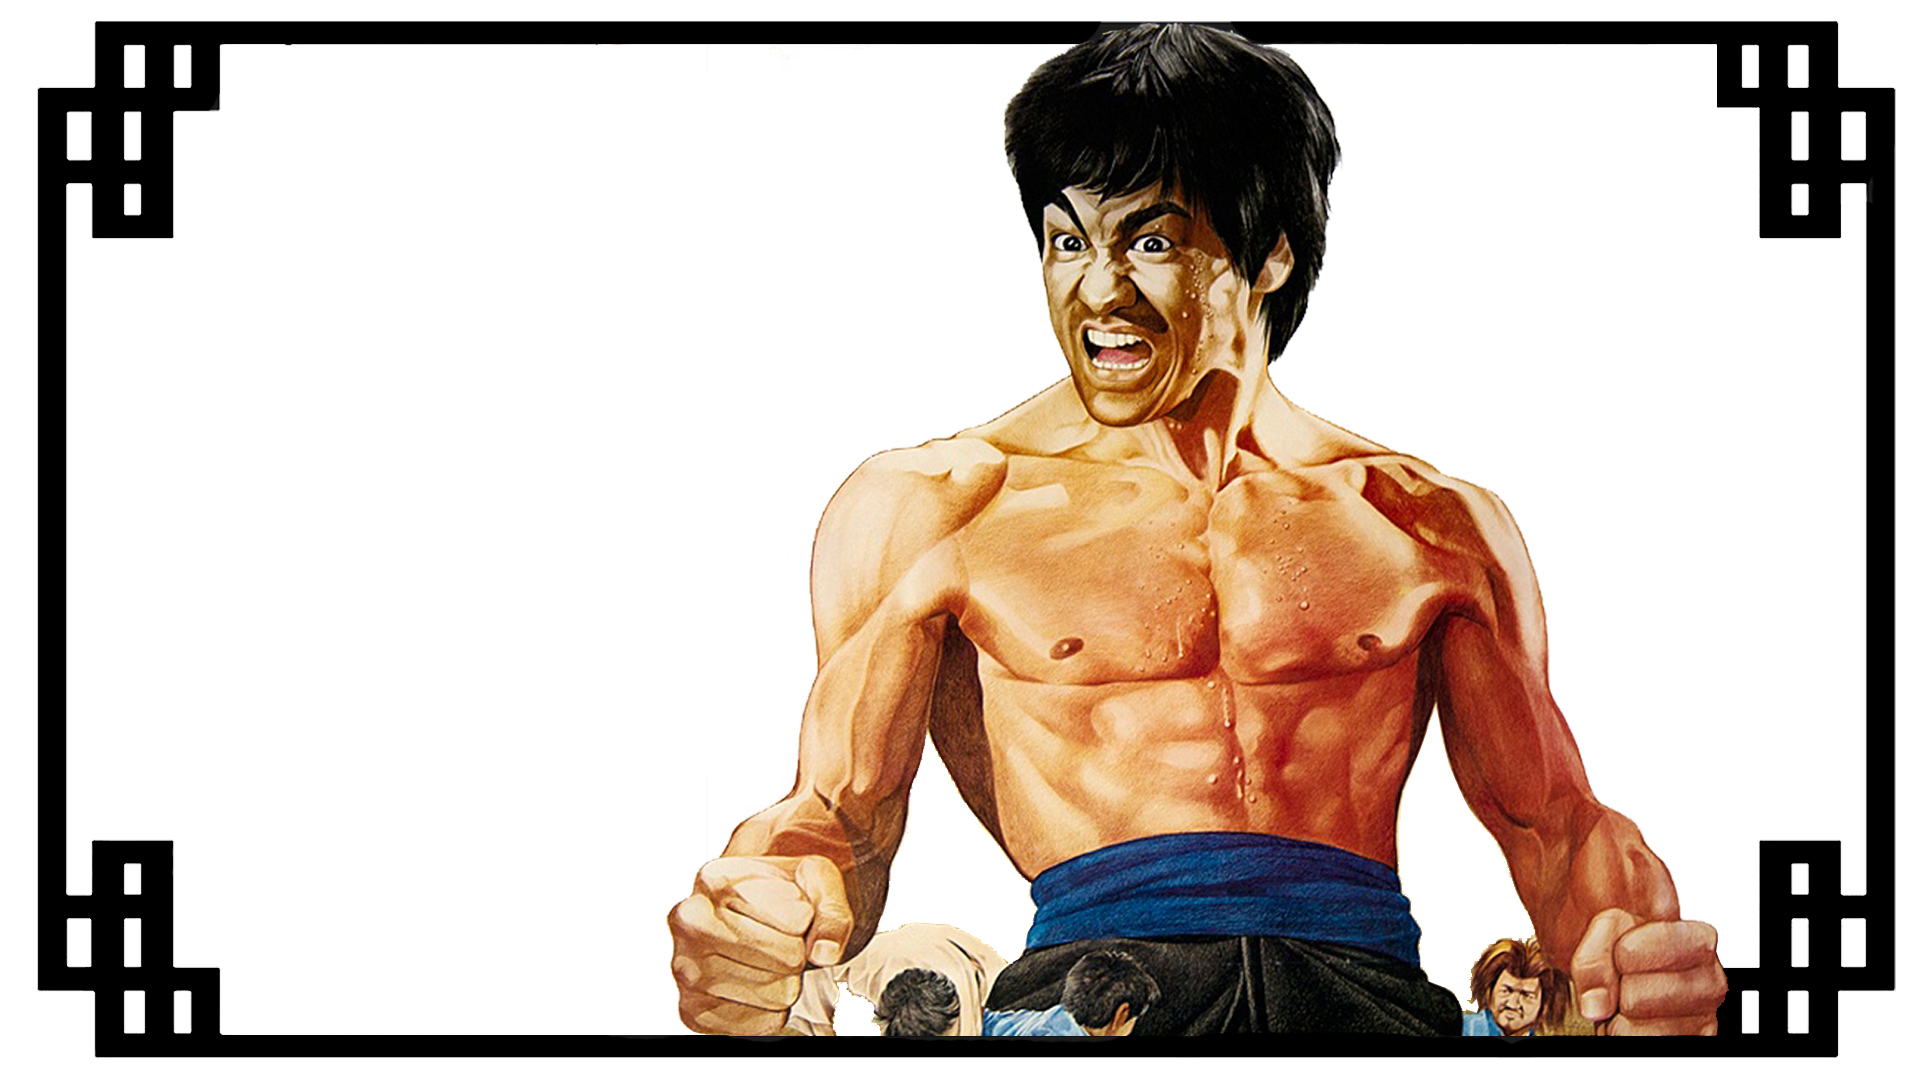 Movie Fist of Fury HD Wallpaper | Background Image